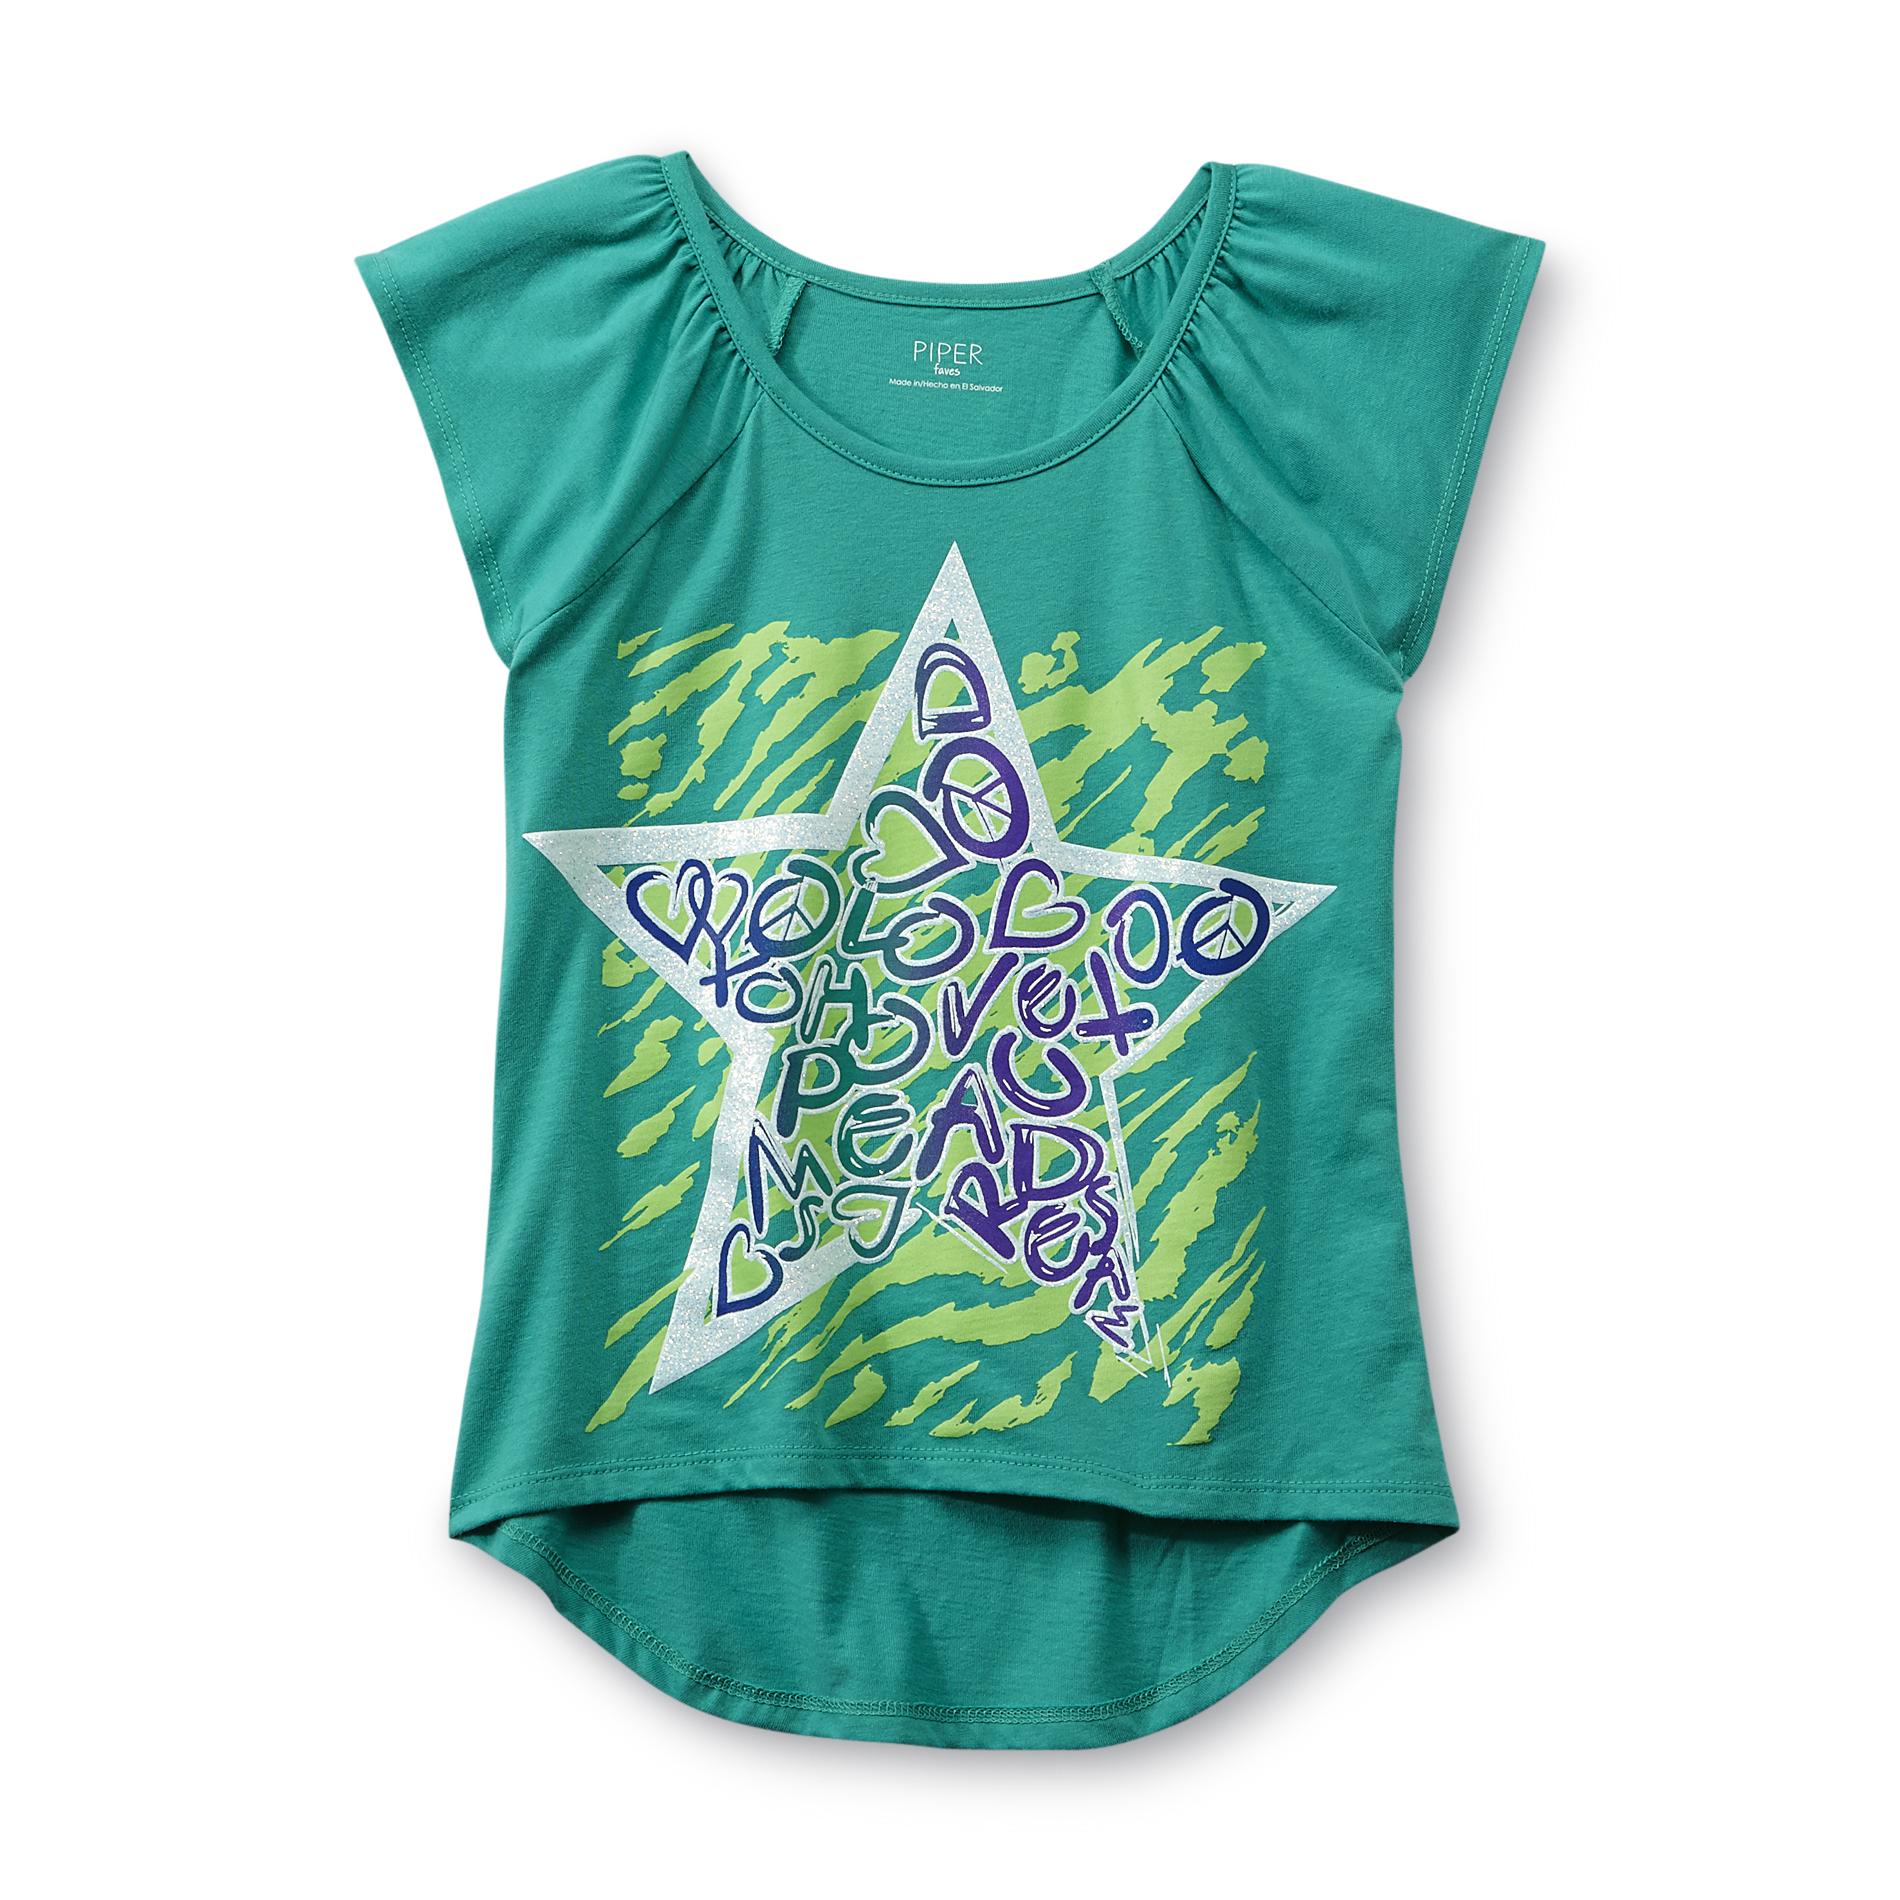 Piper Girl's High-Low Graphic T-Shirt - Star